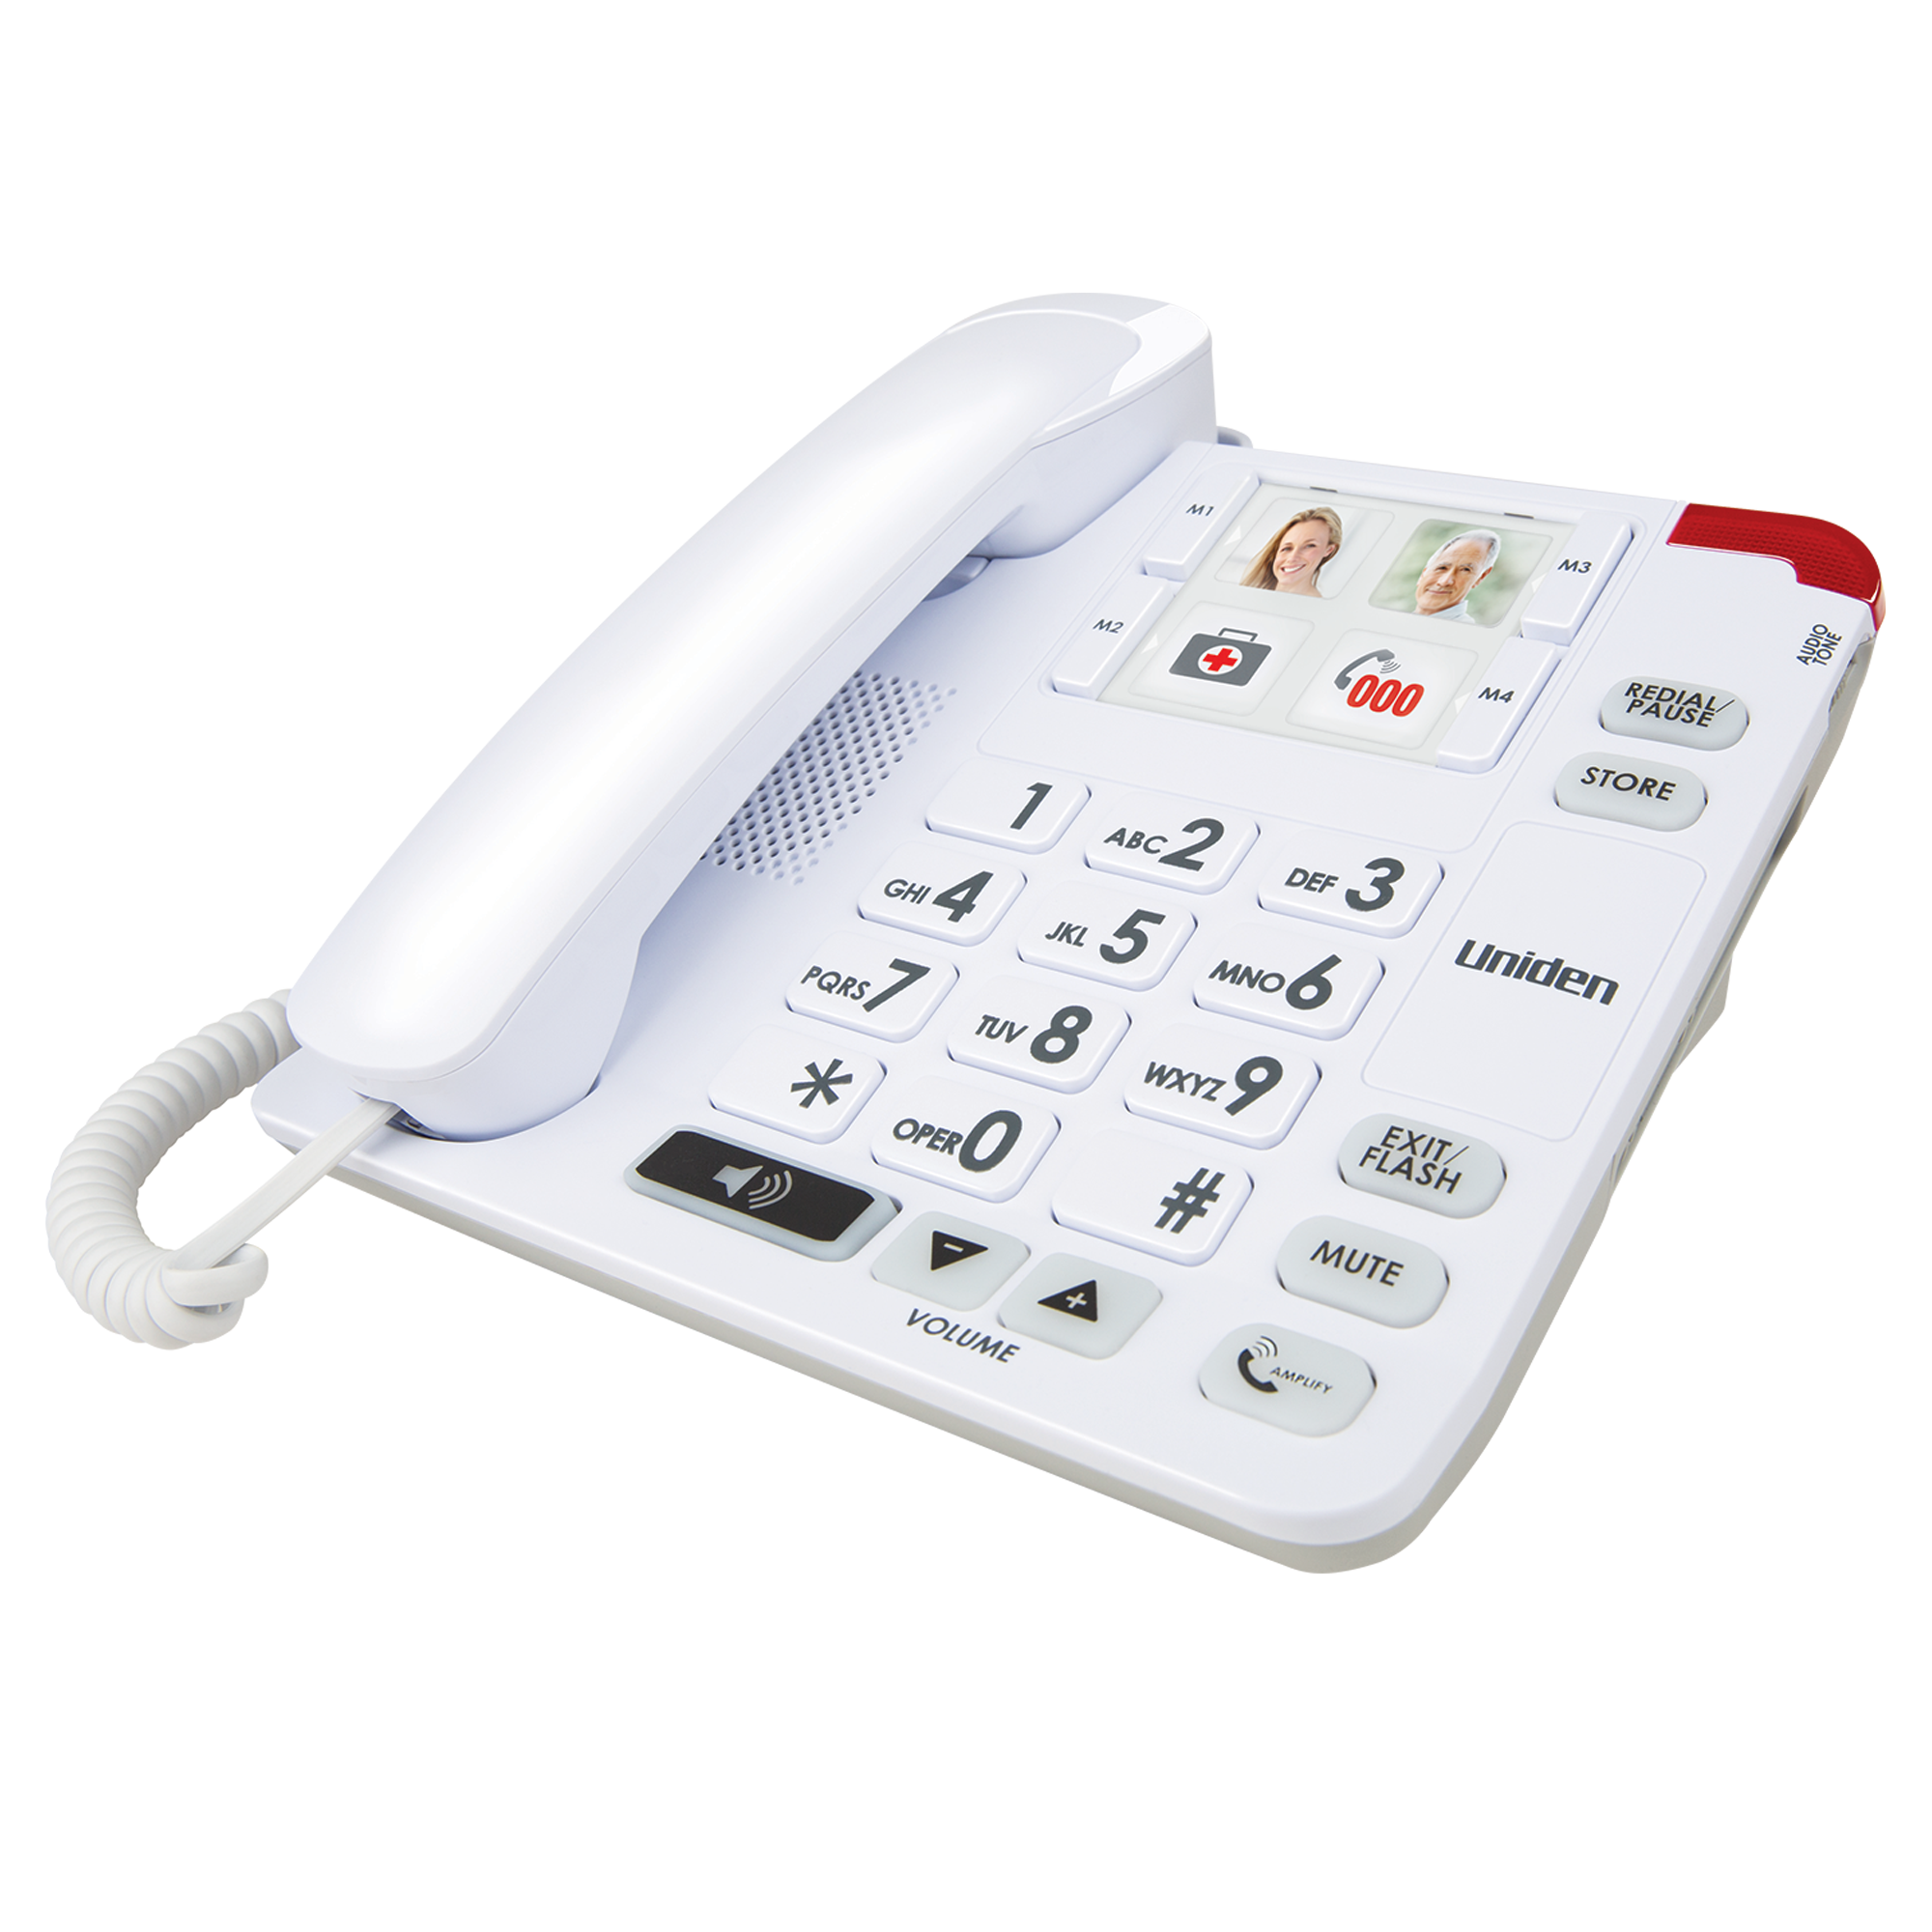 Uniden SSE34 Hearing Impaired Corded Telephone